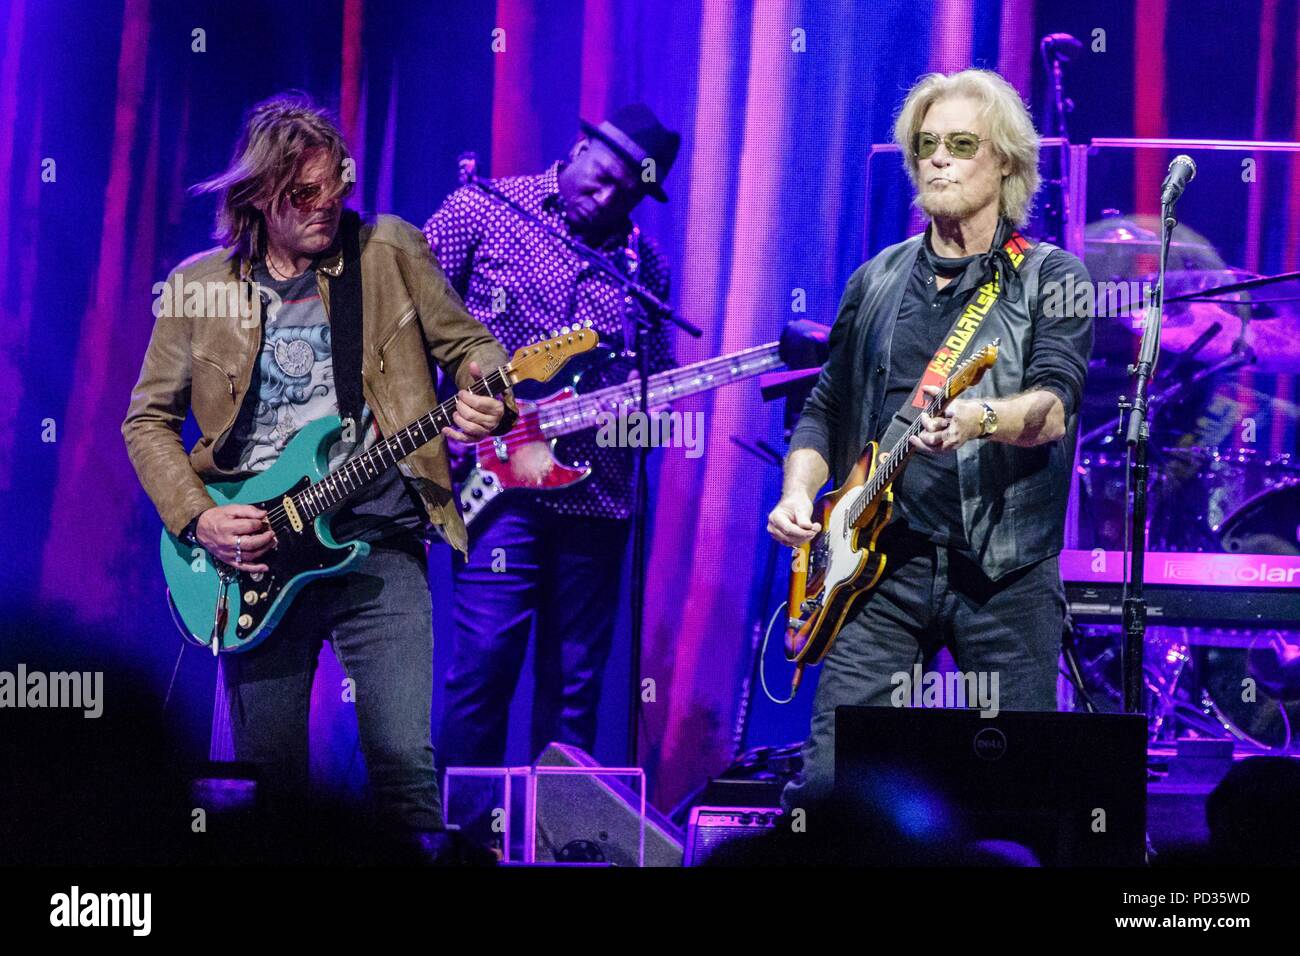 San Diego, California, USA. 4th Aug, 2018. SHANE THERIOT (L) performs with DARYL HALL (R) and JOHN OATES at Viejas Arena in San Diego, California on August 4, 2018 Credit: Marissa Carter/ZUMA Wire/Alamy Live News Stock Photo